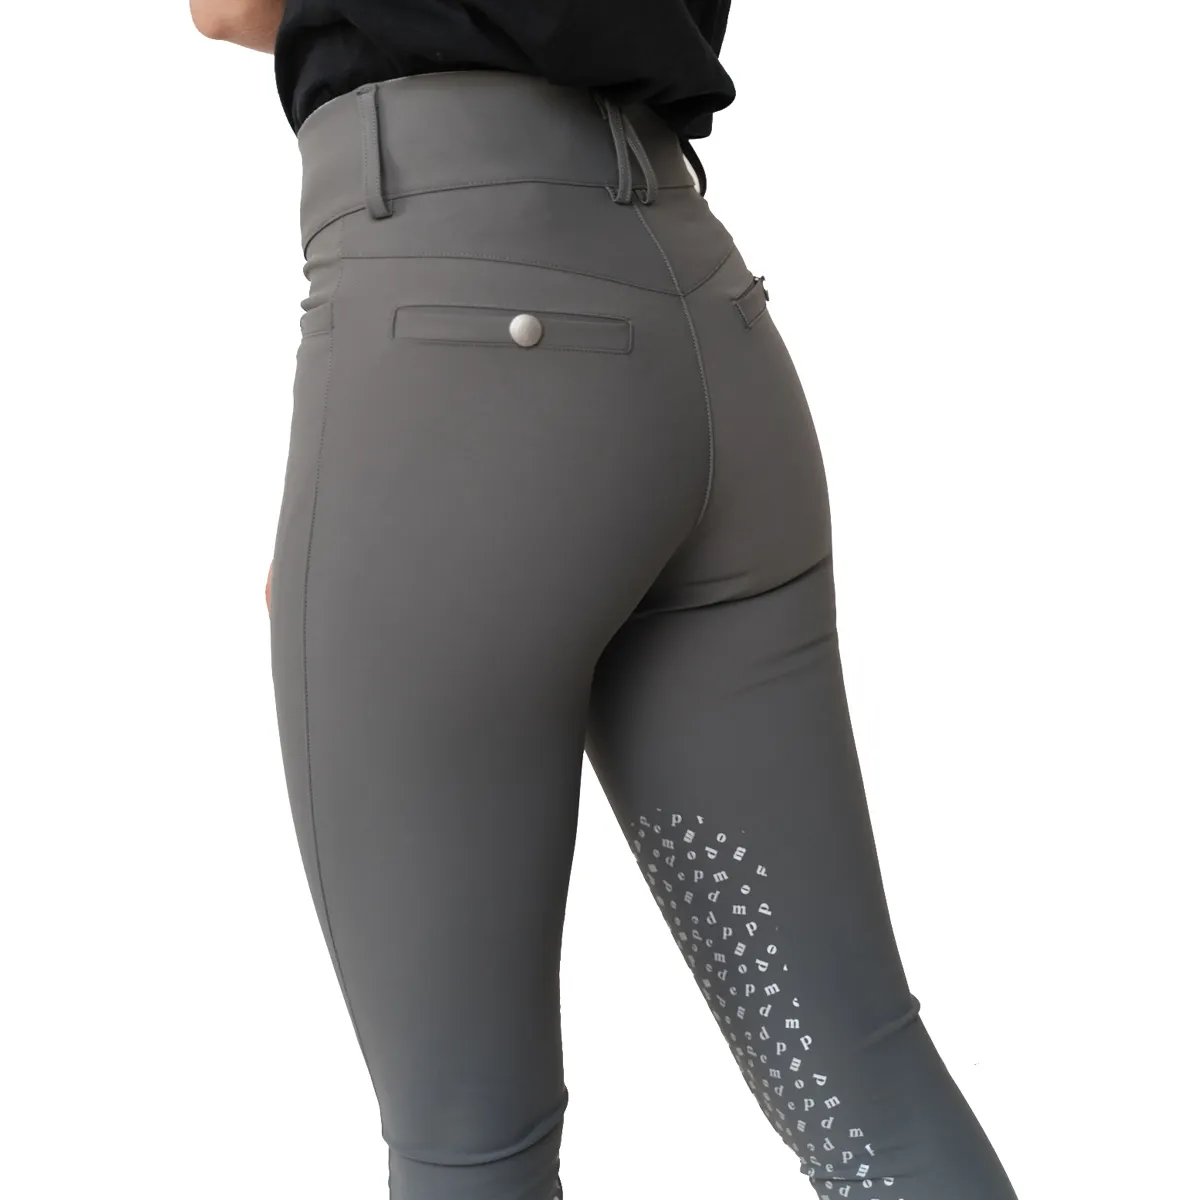 Horse Riding Leggings Equestrian Clothing Factory Riding Tights Customize Silicone Print Equitation Breeches Woman Pants